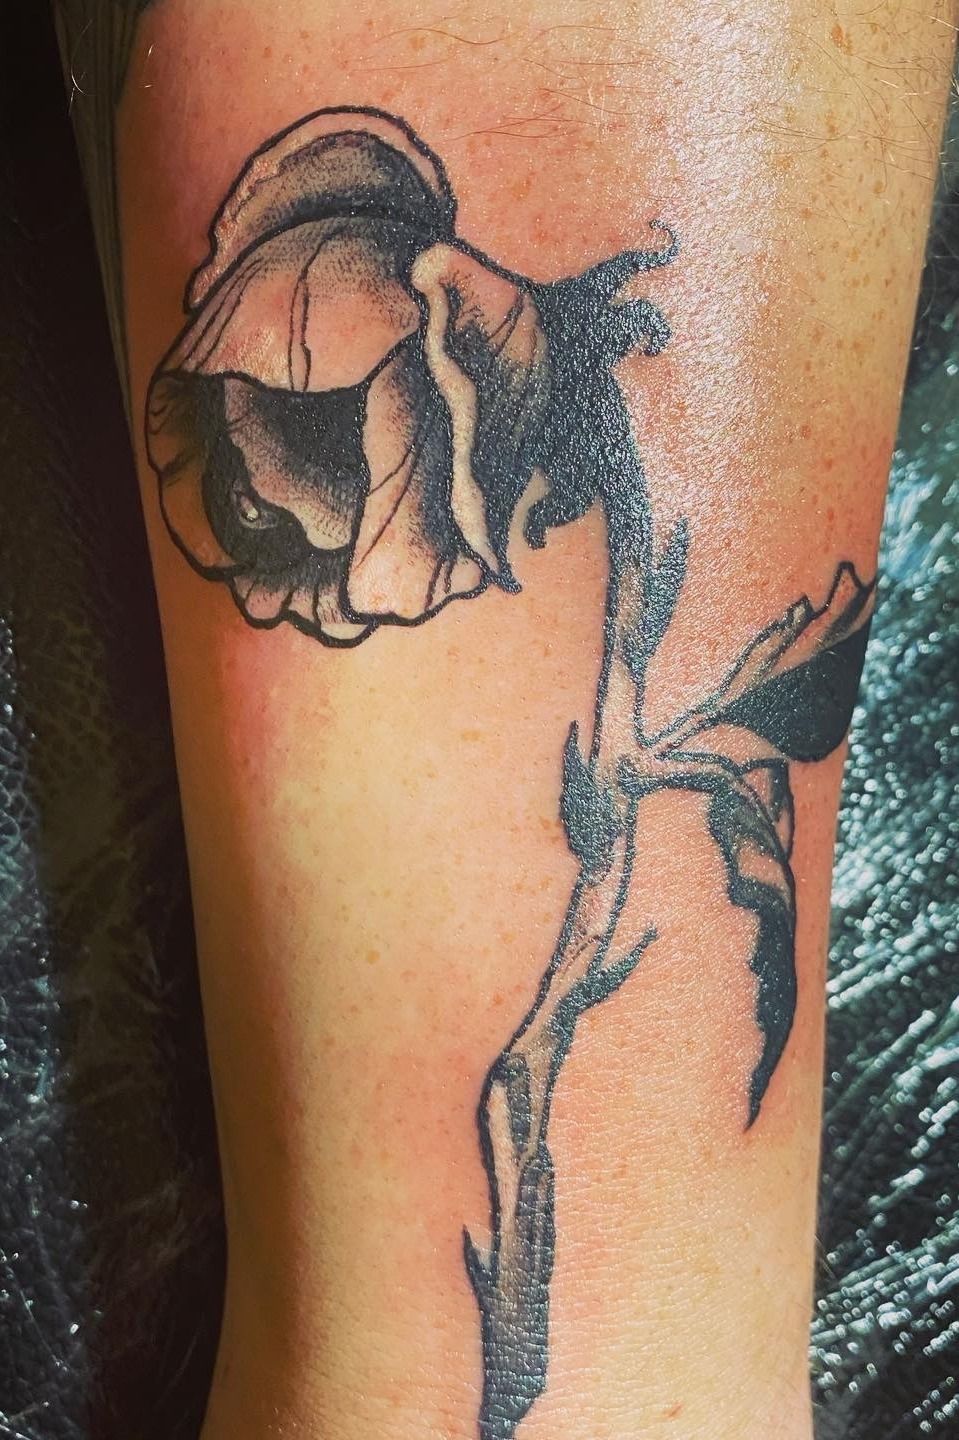 Dead Rose Tattoo Meaning Exploring Tattoo Meanings and Their Cultural  Significance  Impeccable Nest